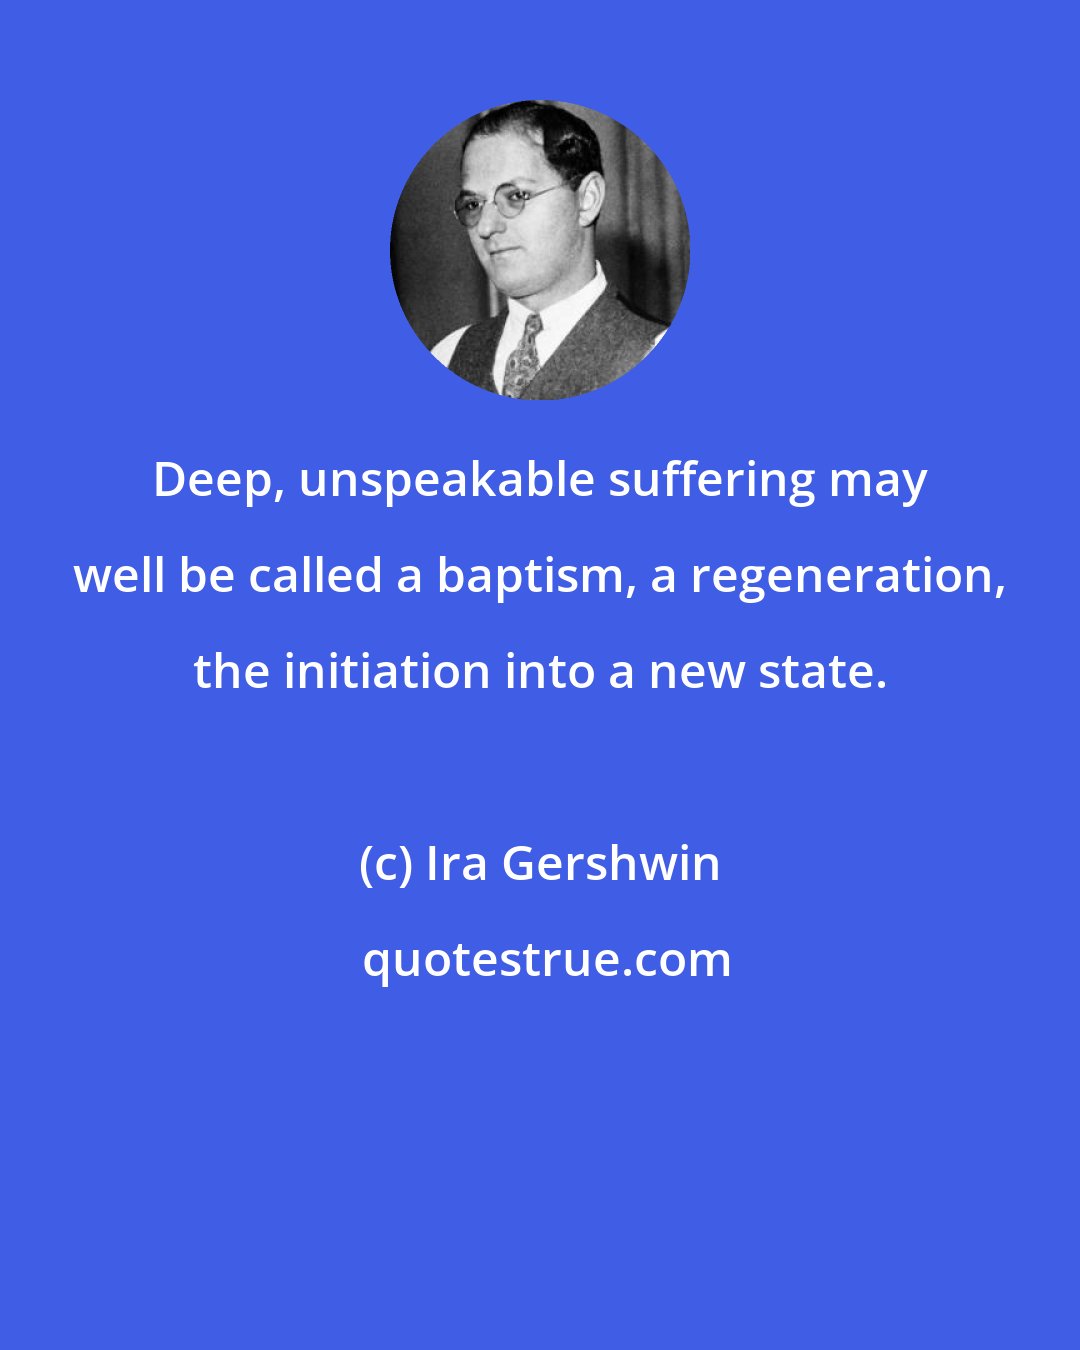 Ira Gershwin: Deep, unspeakable suffering may well be called a baptism, a regeneration, the initiation into a new state.